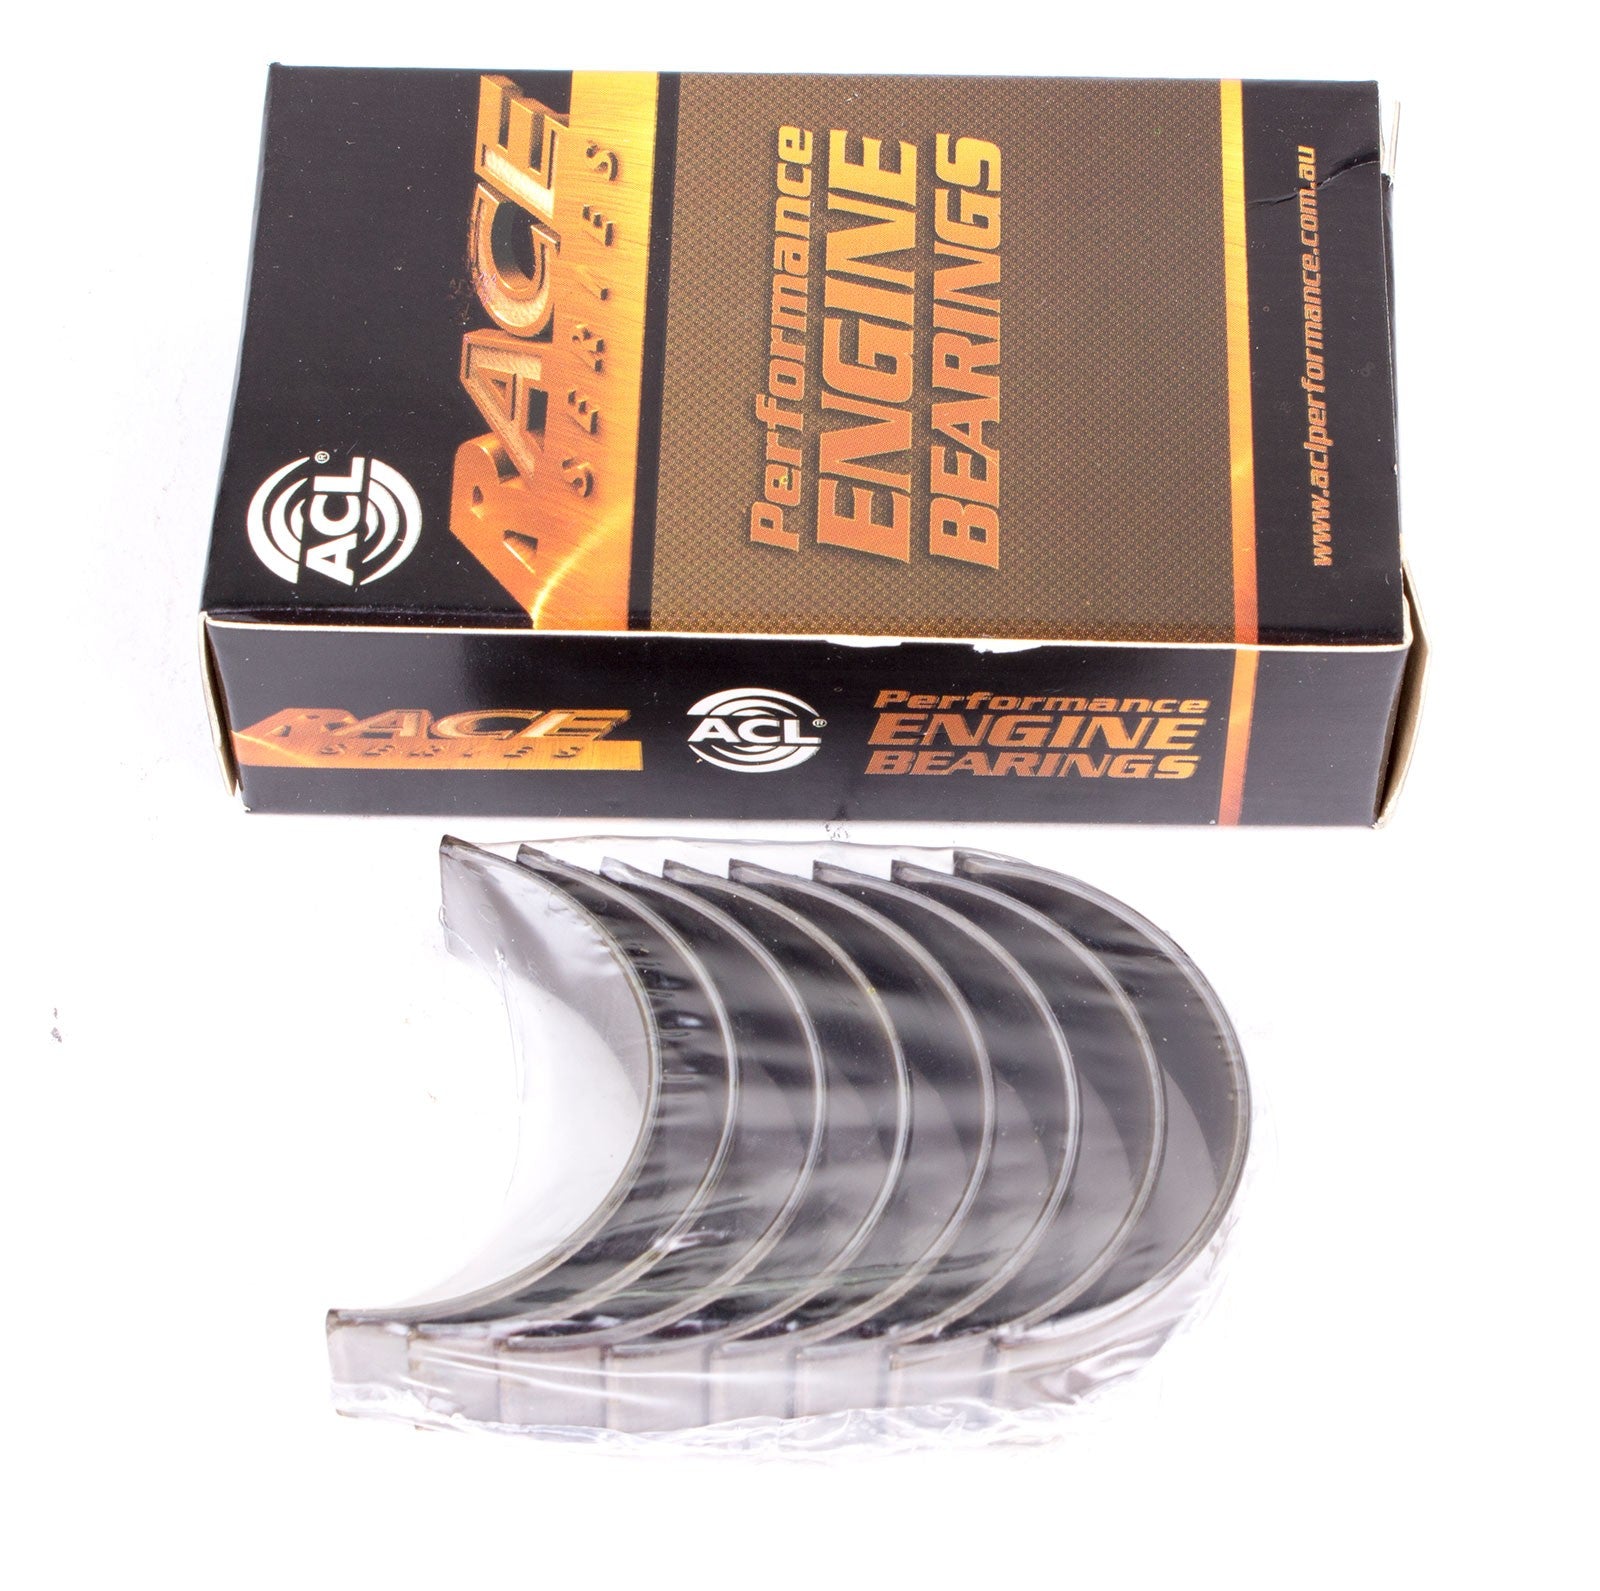 ACL 6B1995H-.25 Con rod bearing set (ACL Race Series) Photo-0 